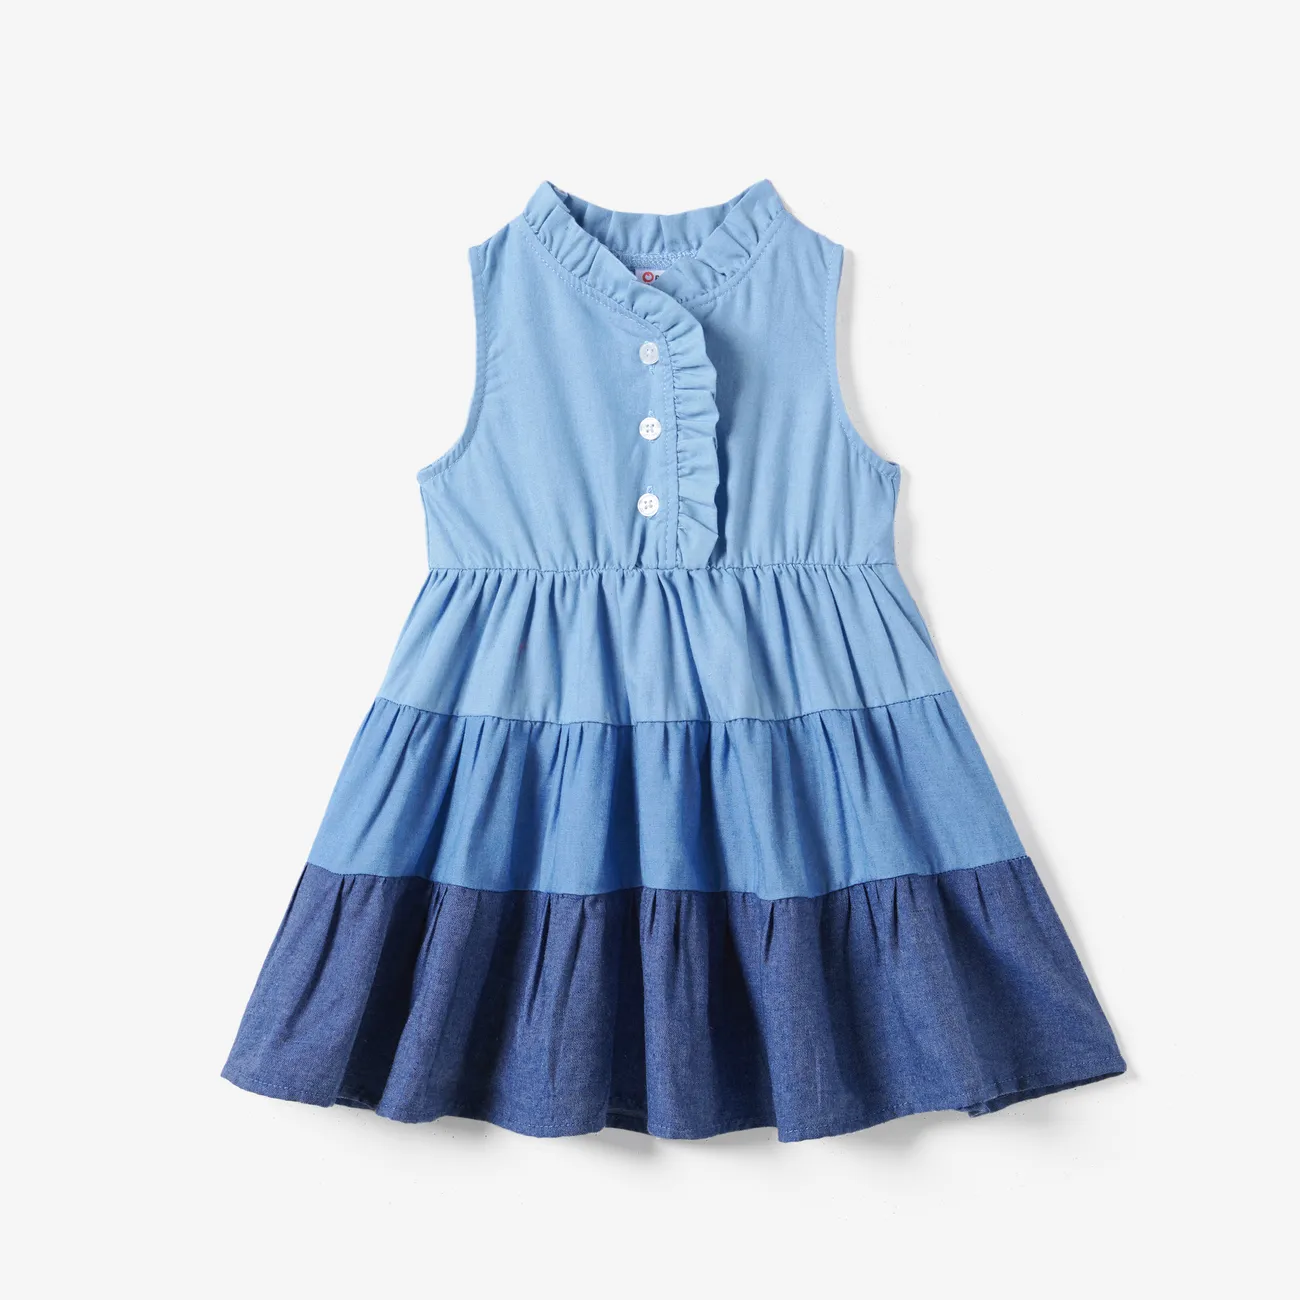 Family Matching Colorblock Shirt and Tiered A-line Pleated Dress Sets DENIMBLUE big image 1